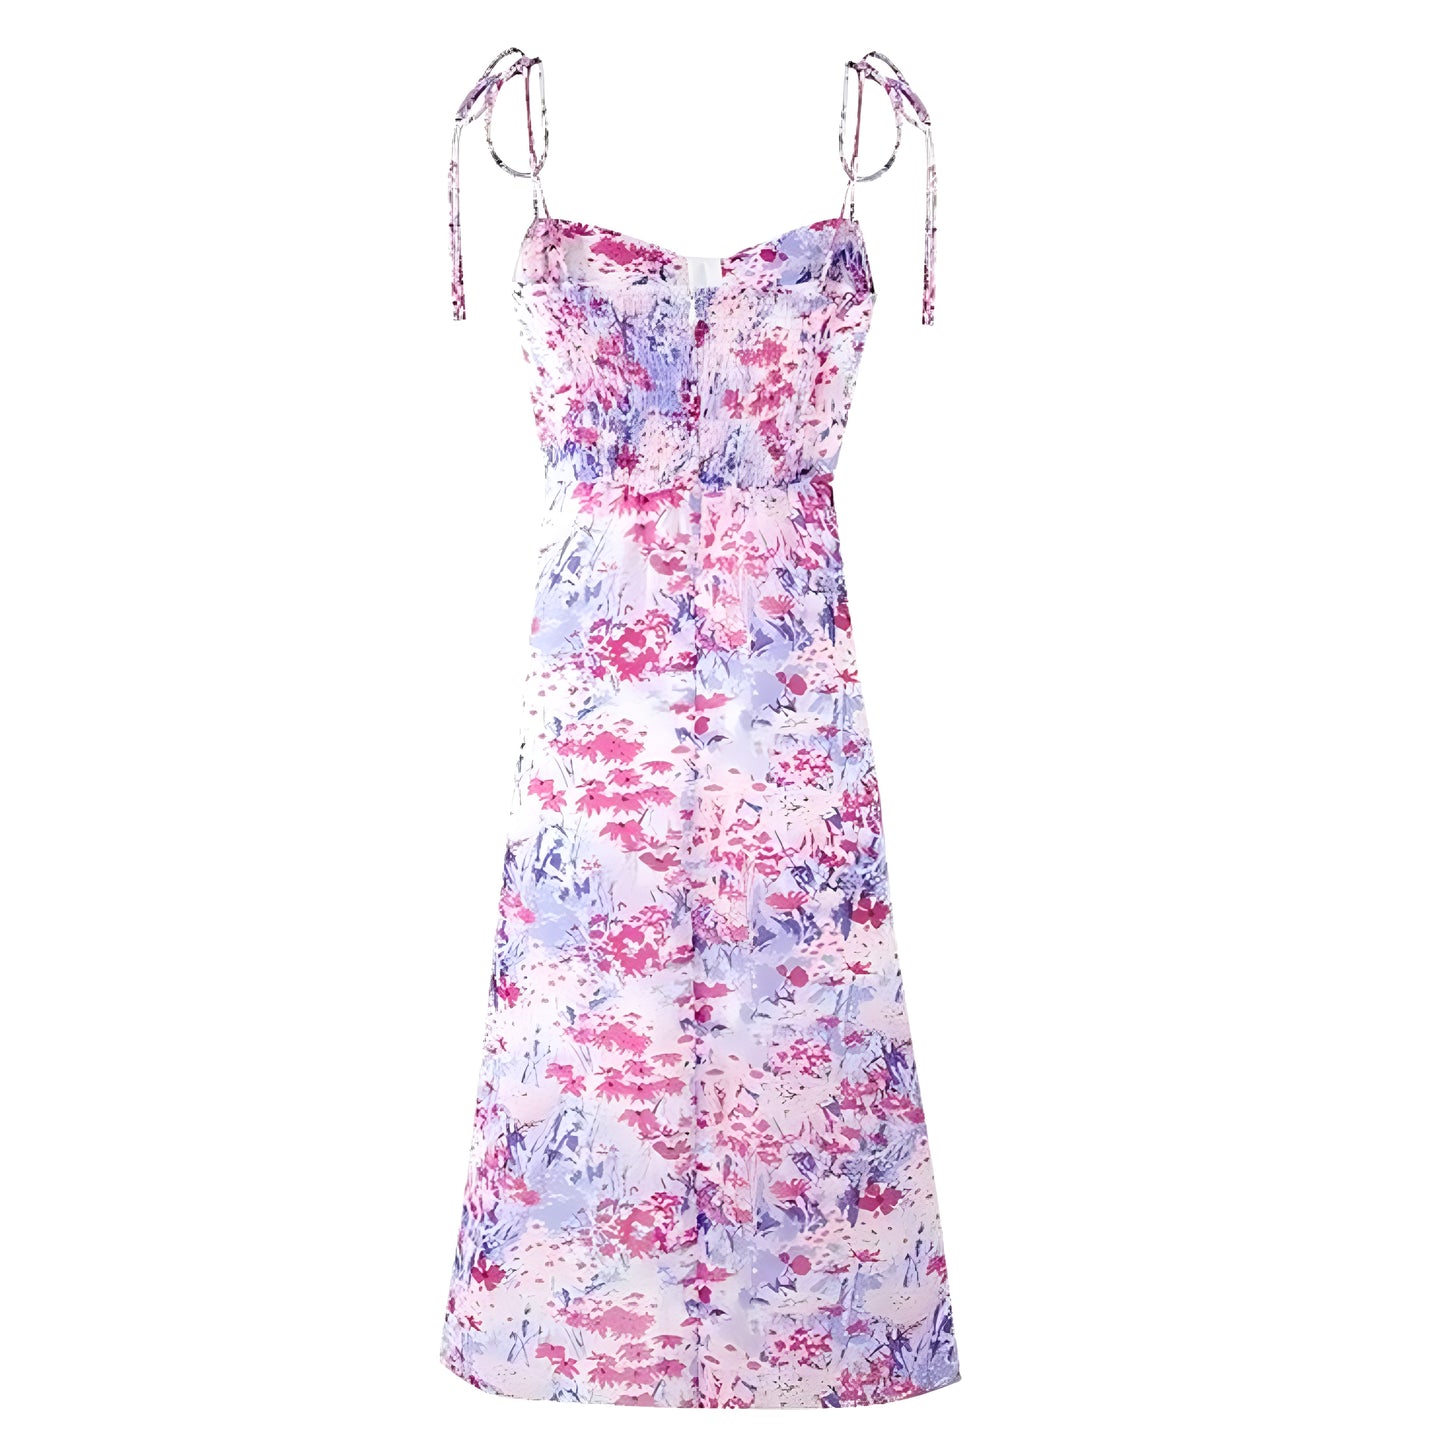 floral-print-light-purple-pink-multi-color-flower-tie-dye-patterned-slim-fit-bodycon-silhouette-corset-bustier-sweetheart-neckline-spaghetti-strap-sleeveless-backless-open-back-linen-midi-long-maxi-dress-evening-gown-women-ladies-teens-tweens-chic-trendy-spring-2024-summer-elegant-casual-semi-formal-feminine-preppy-style-coquette-prom-homecoming-hoco-wedding-guest-party-graduation-beach-vacation-sundress-altard-state-zara-revolve-aritzia-loveshackfancy-oh-polly-lulus-hello-molly-dupe